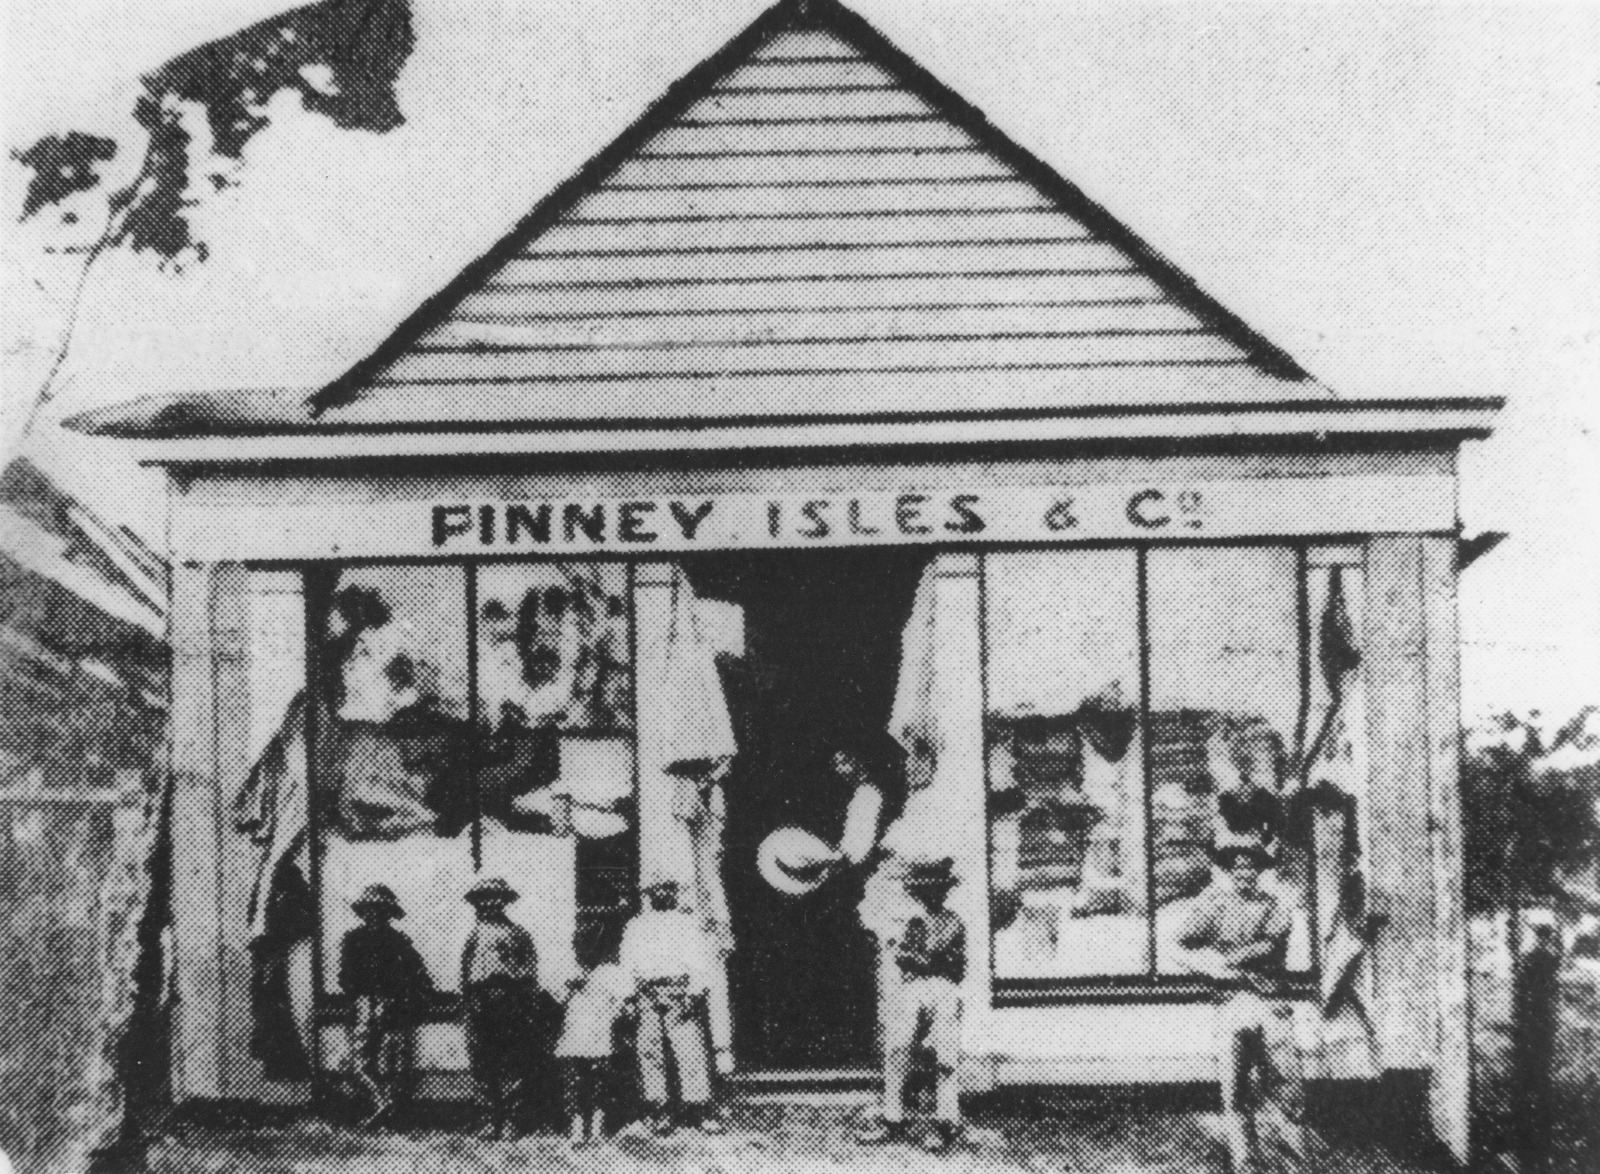 Finney and Isles store, Fortitude Valley, ca. 1868